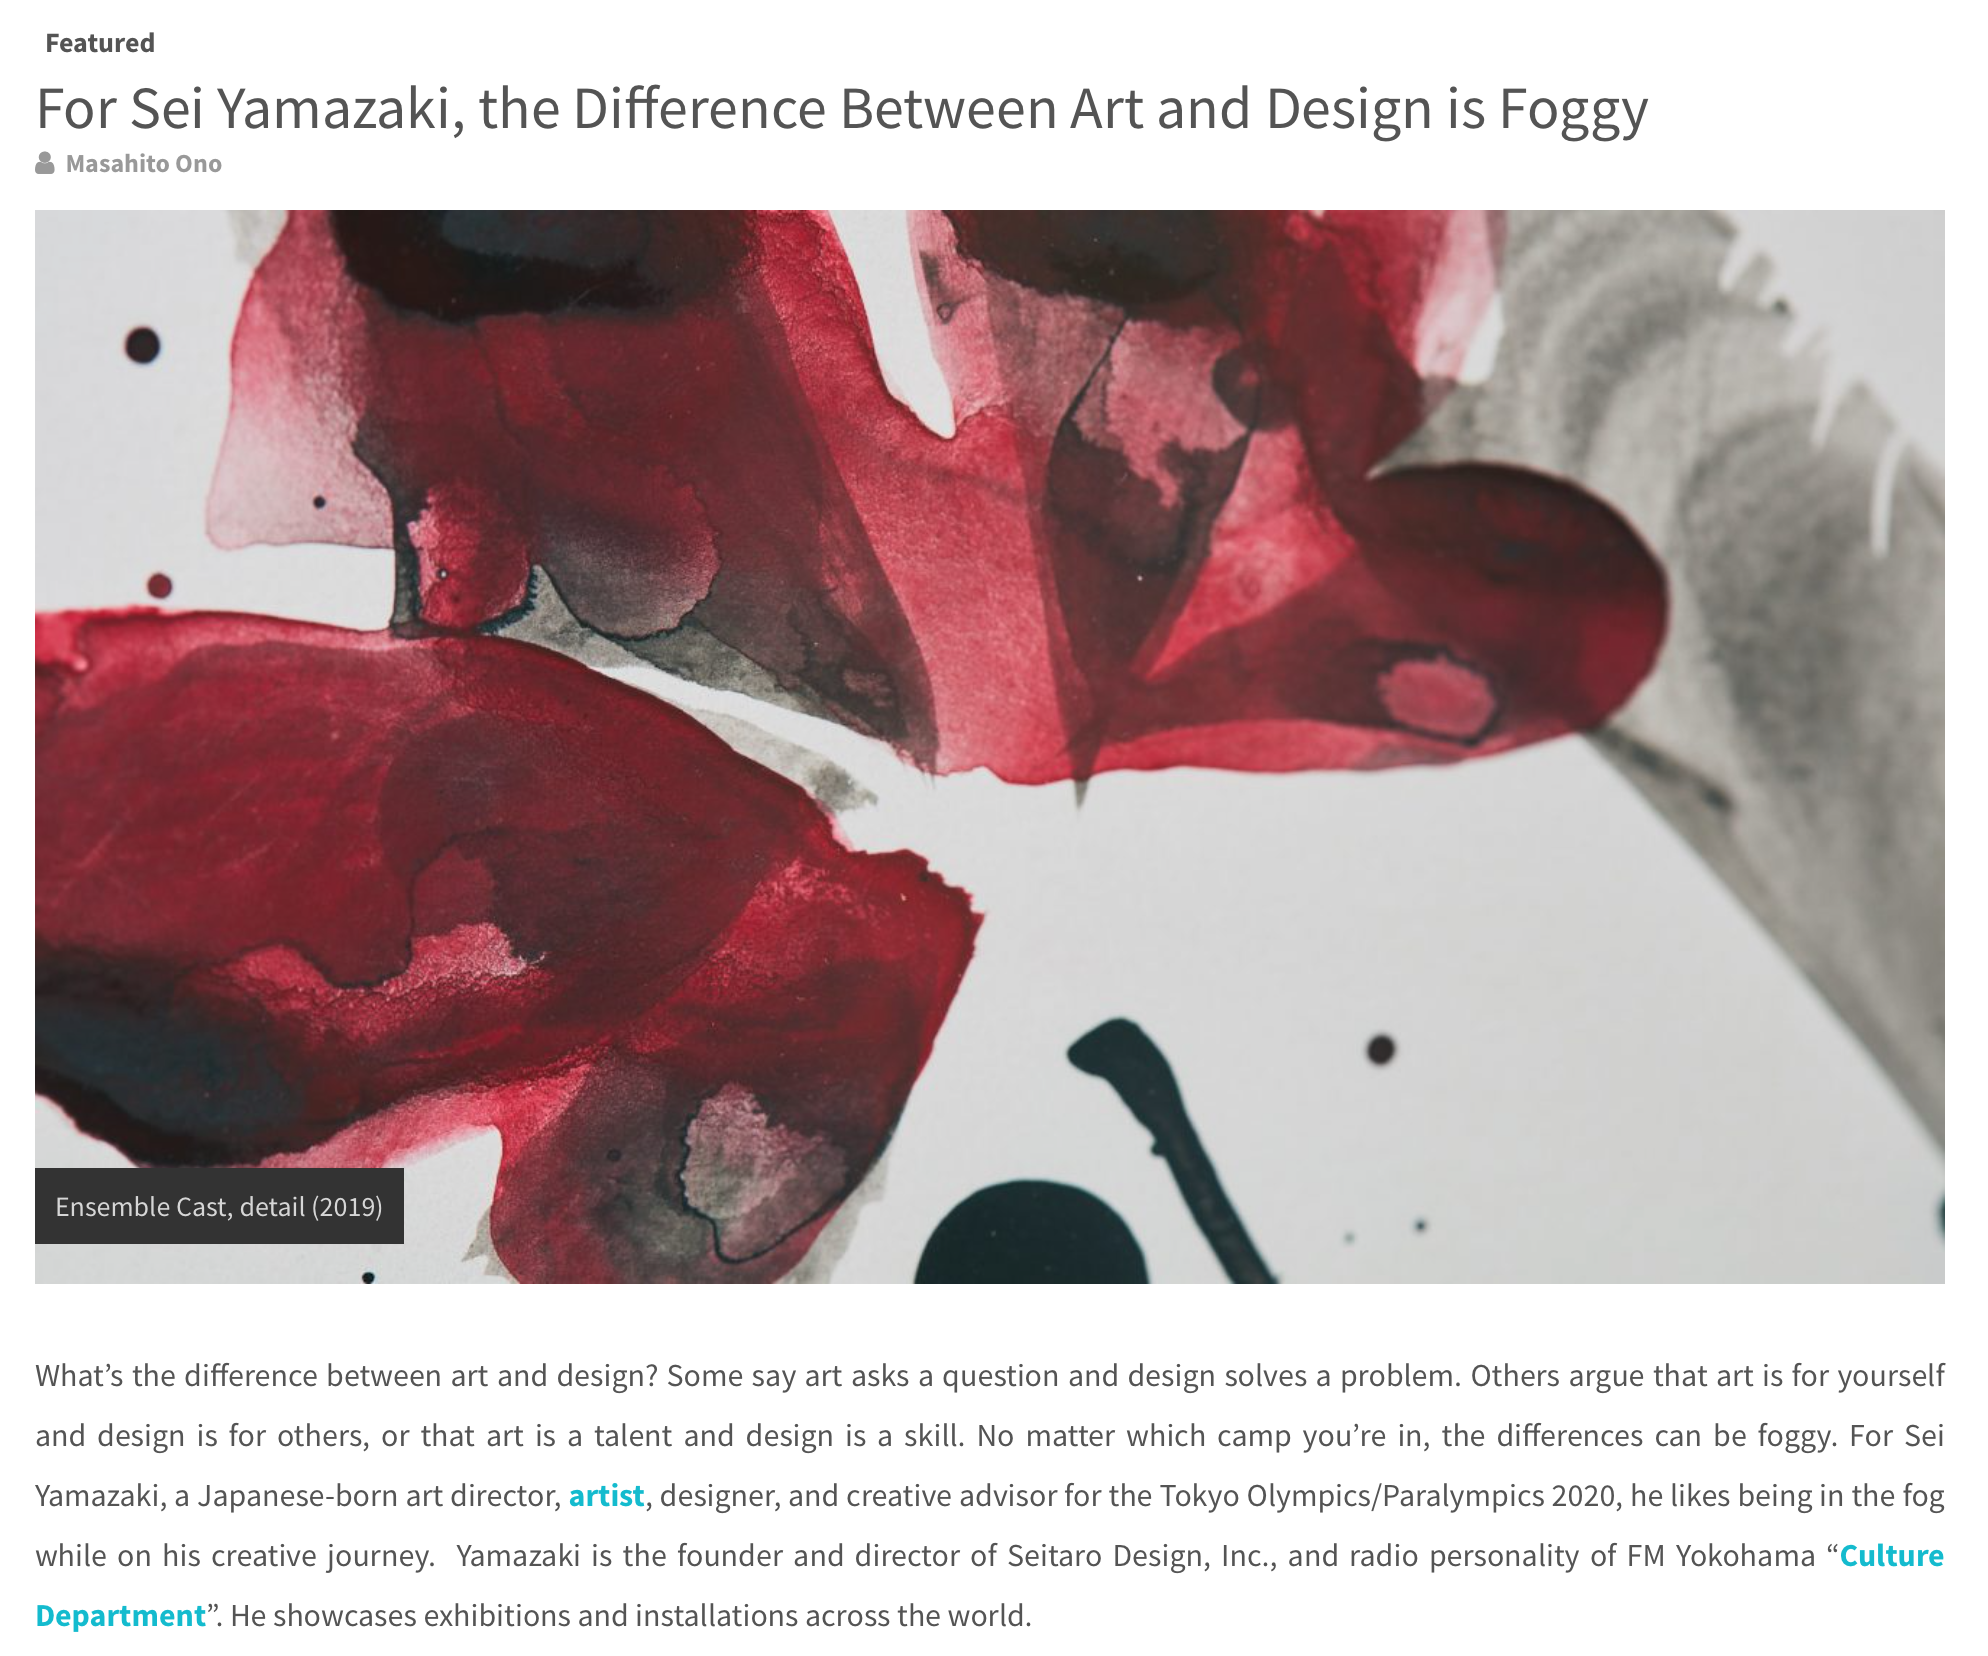 Featured / For Sei Yamazaki, the Difference Between Art and Design is Foggy